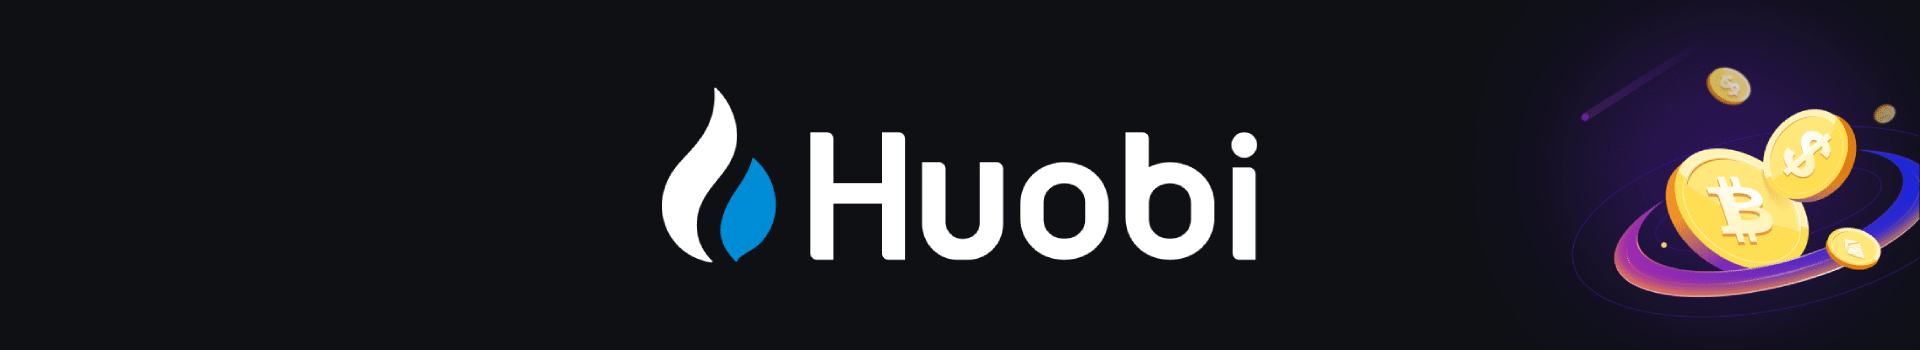 Huobi Review: A Look at Fees, Limits, and Supported Cryptocurrencies